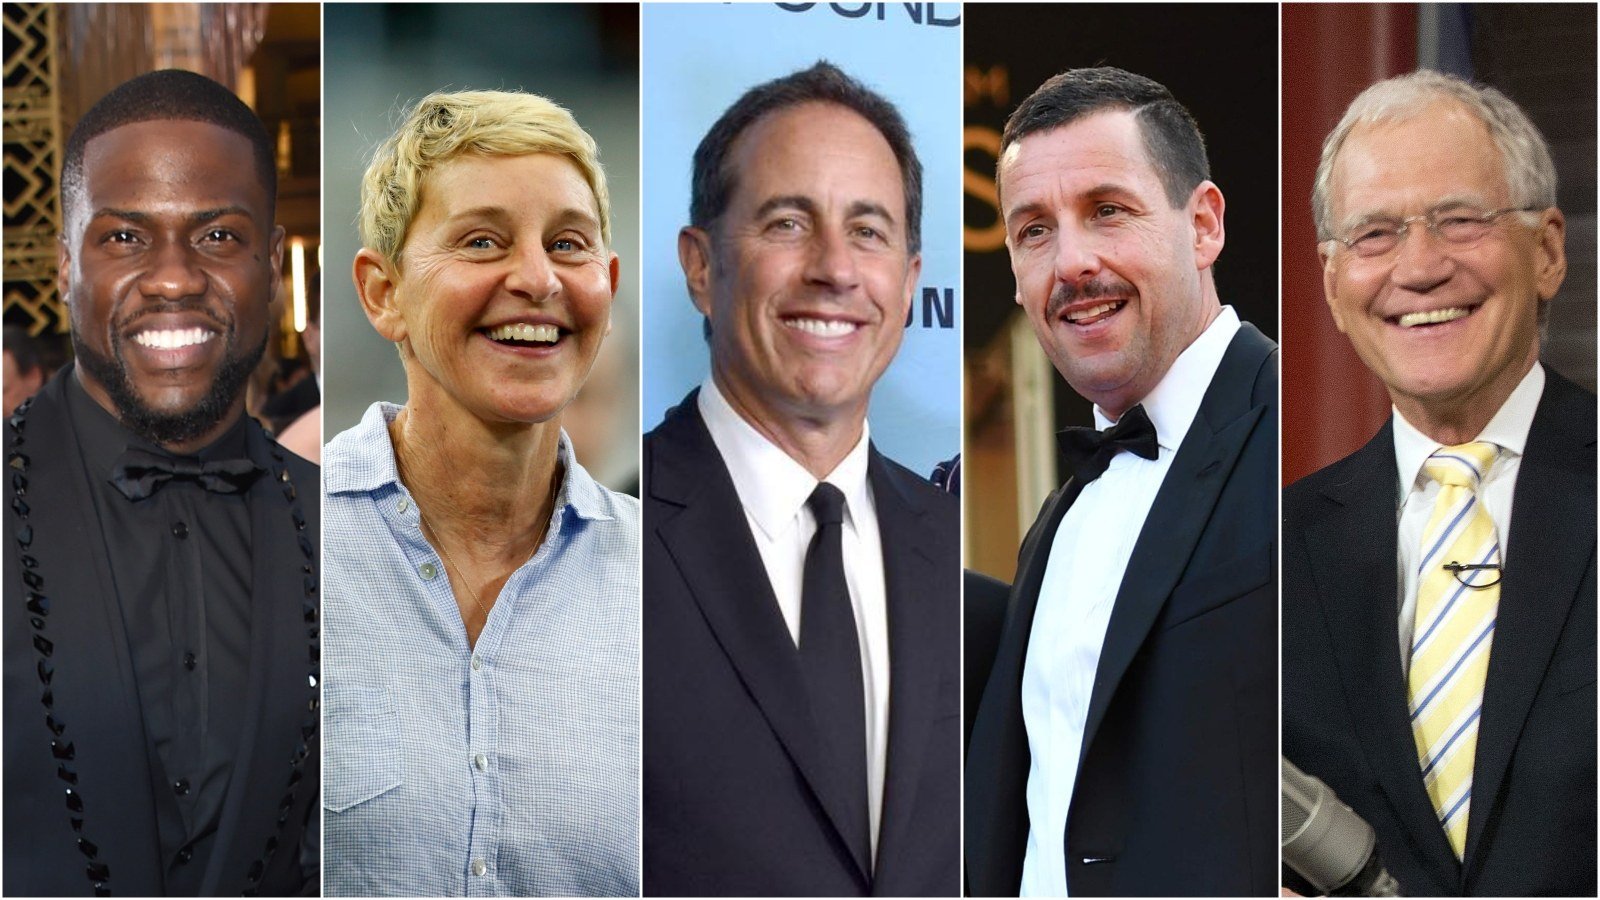 Laughing all the way to the bank: wealthy comedians Kevin Hart, Ellen DeGeneres, Jerry Seinfeld, Adam Sandler and David Letterman. Photos: AP, USA Today Sports, @jerryseinfield/Instagram, AFP